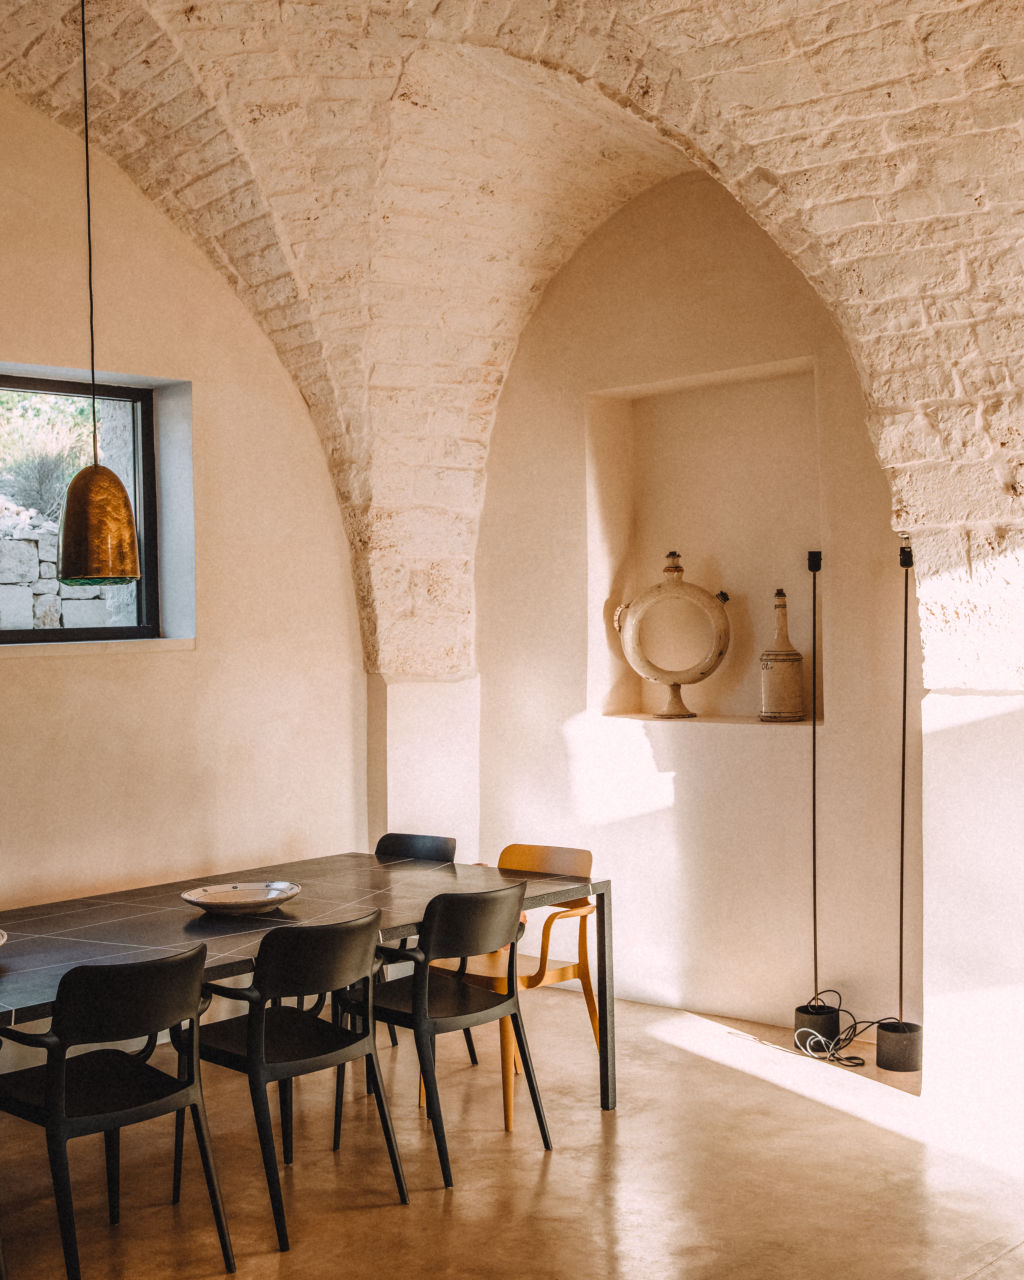 The dining room sits under the arched stone ceiling. Photo: Agi Sibiga